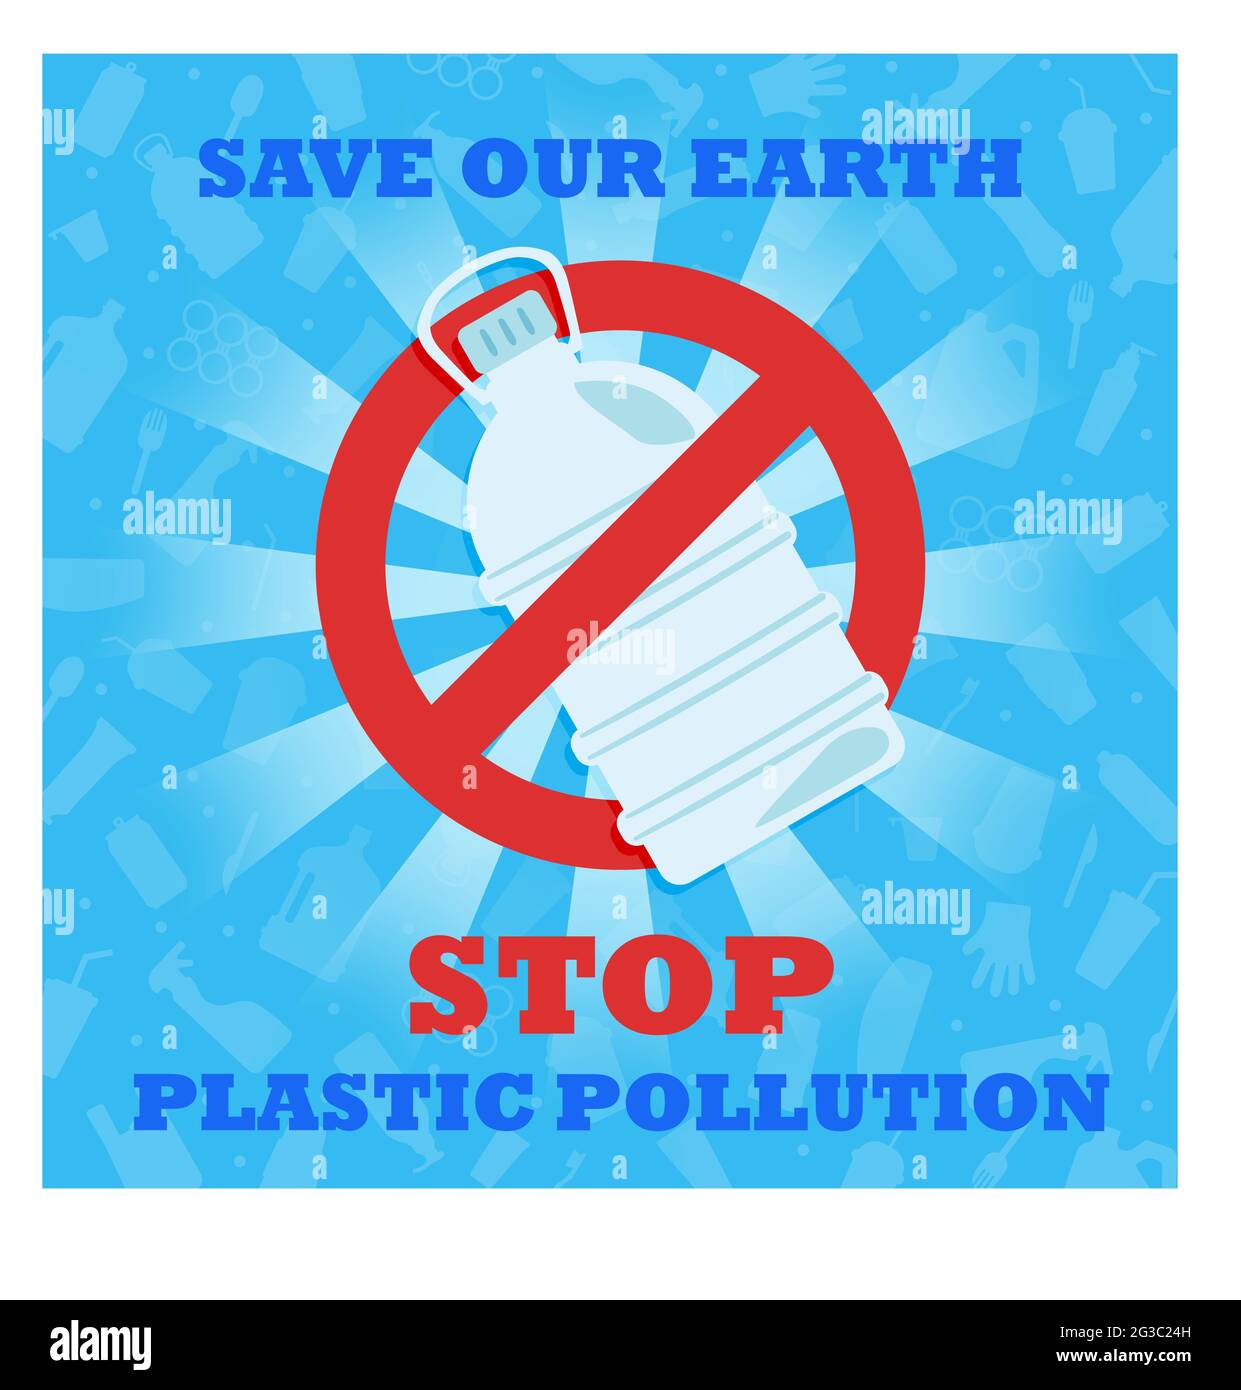 https://c8.alamy.com/comp/2G3C24H/stop-plastic-pollution-save-our-earth-a-banner-with-a-red-prohibition-sign-crosses-out-the-plastic-bottle-environmental-poster-say-no-to-plastic-2G3C24H.jpg